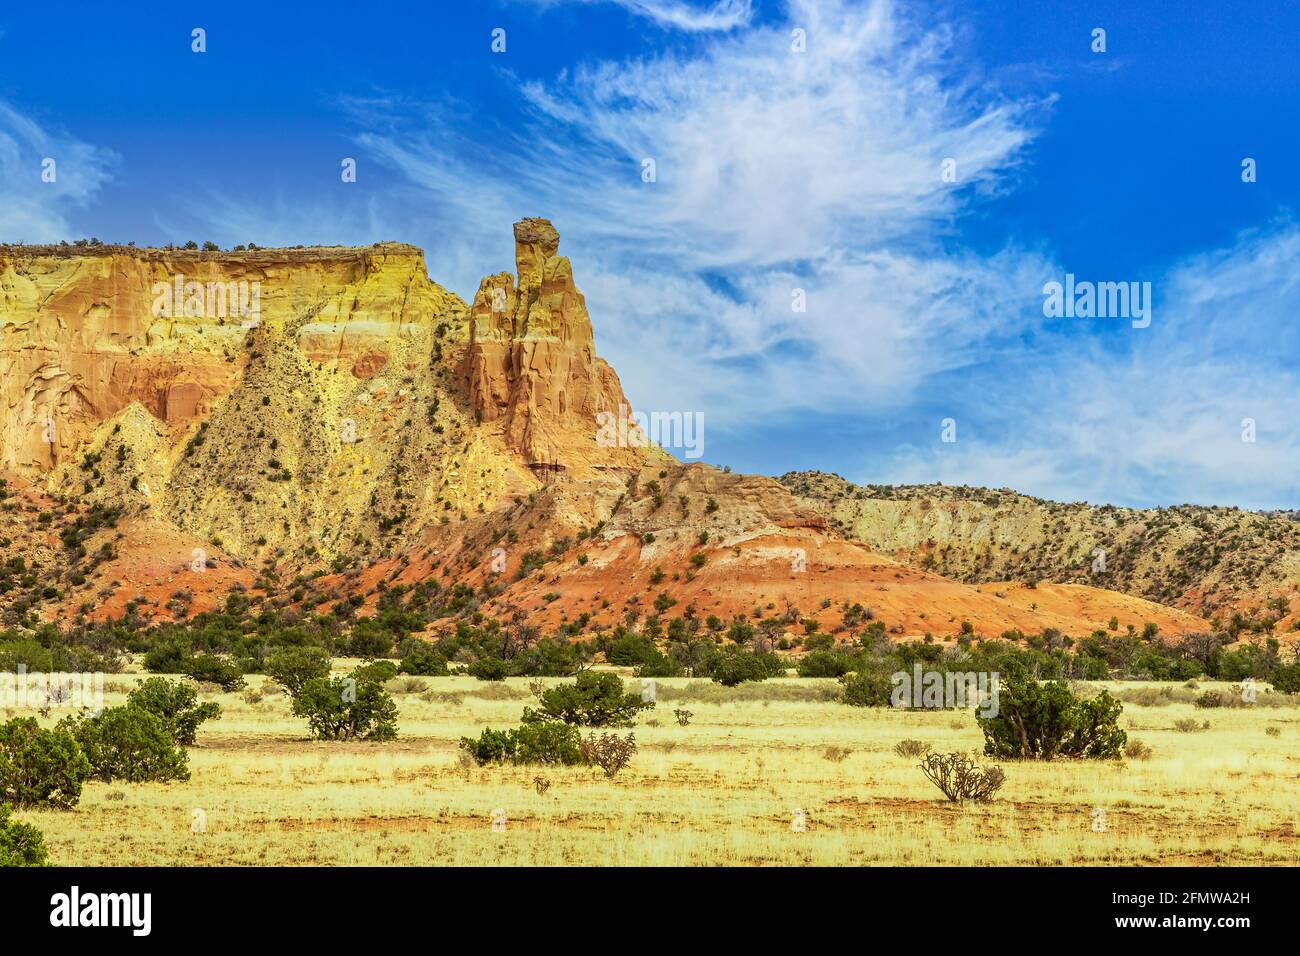 Landscape view of Chimney Rock at Abiquiu, New Mexico., USA. Stock Photo